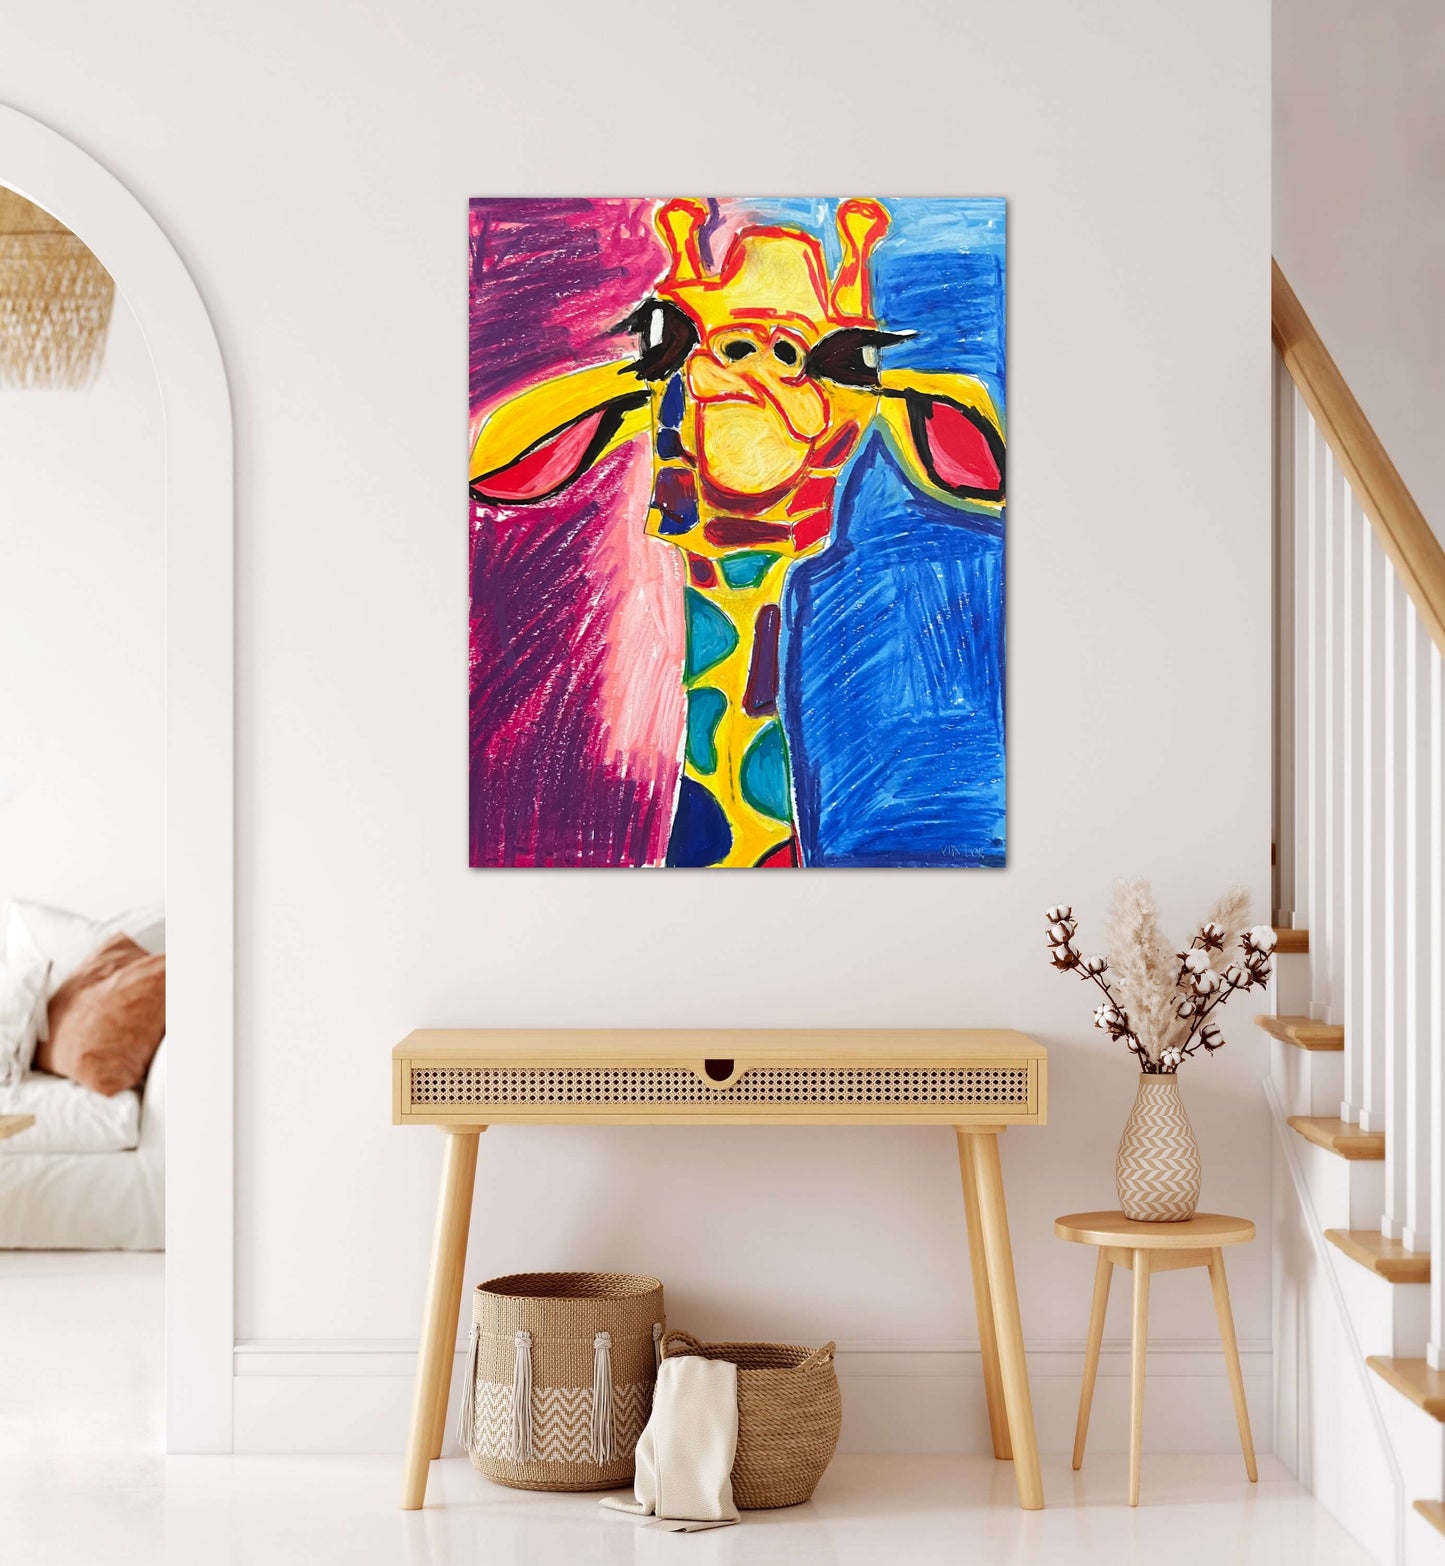 Emily The Giraffe - Print, Poster, Stretched Canvas Print